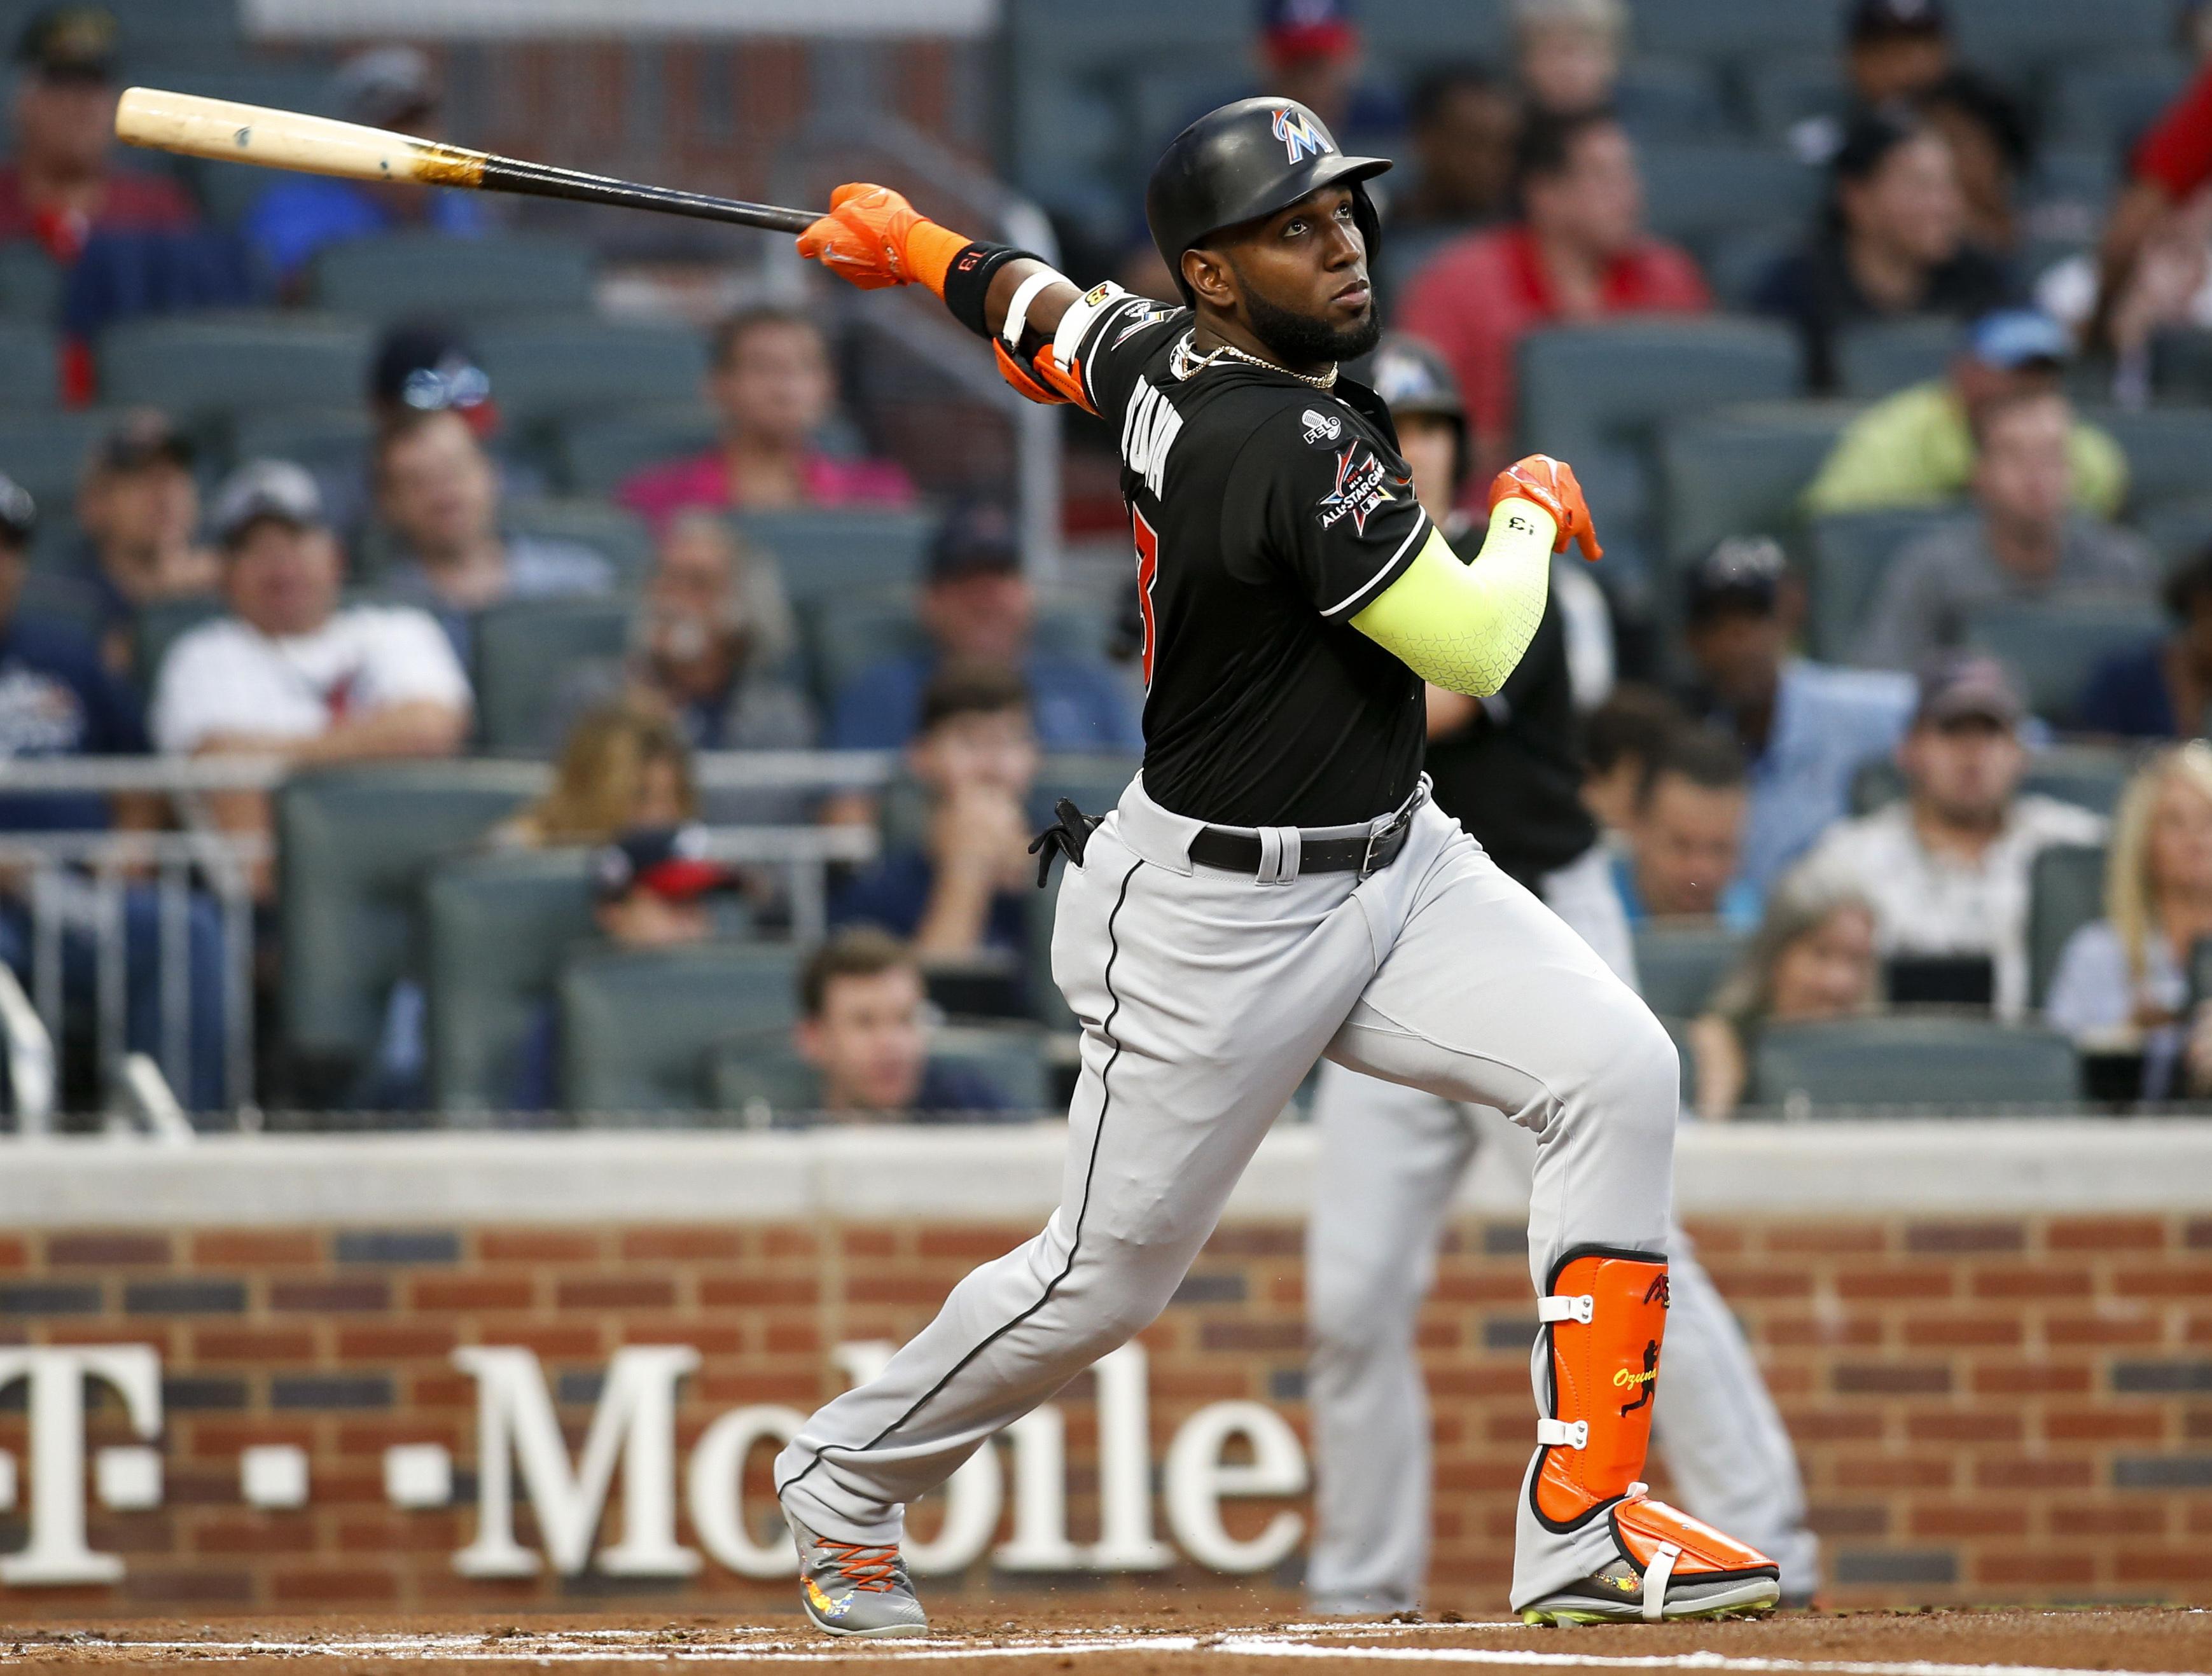 Marlins trade Marcell Ozuna to Cardinals for 4 prospects | The Spokesman-Review3477 x 2635